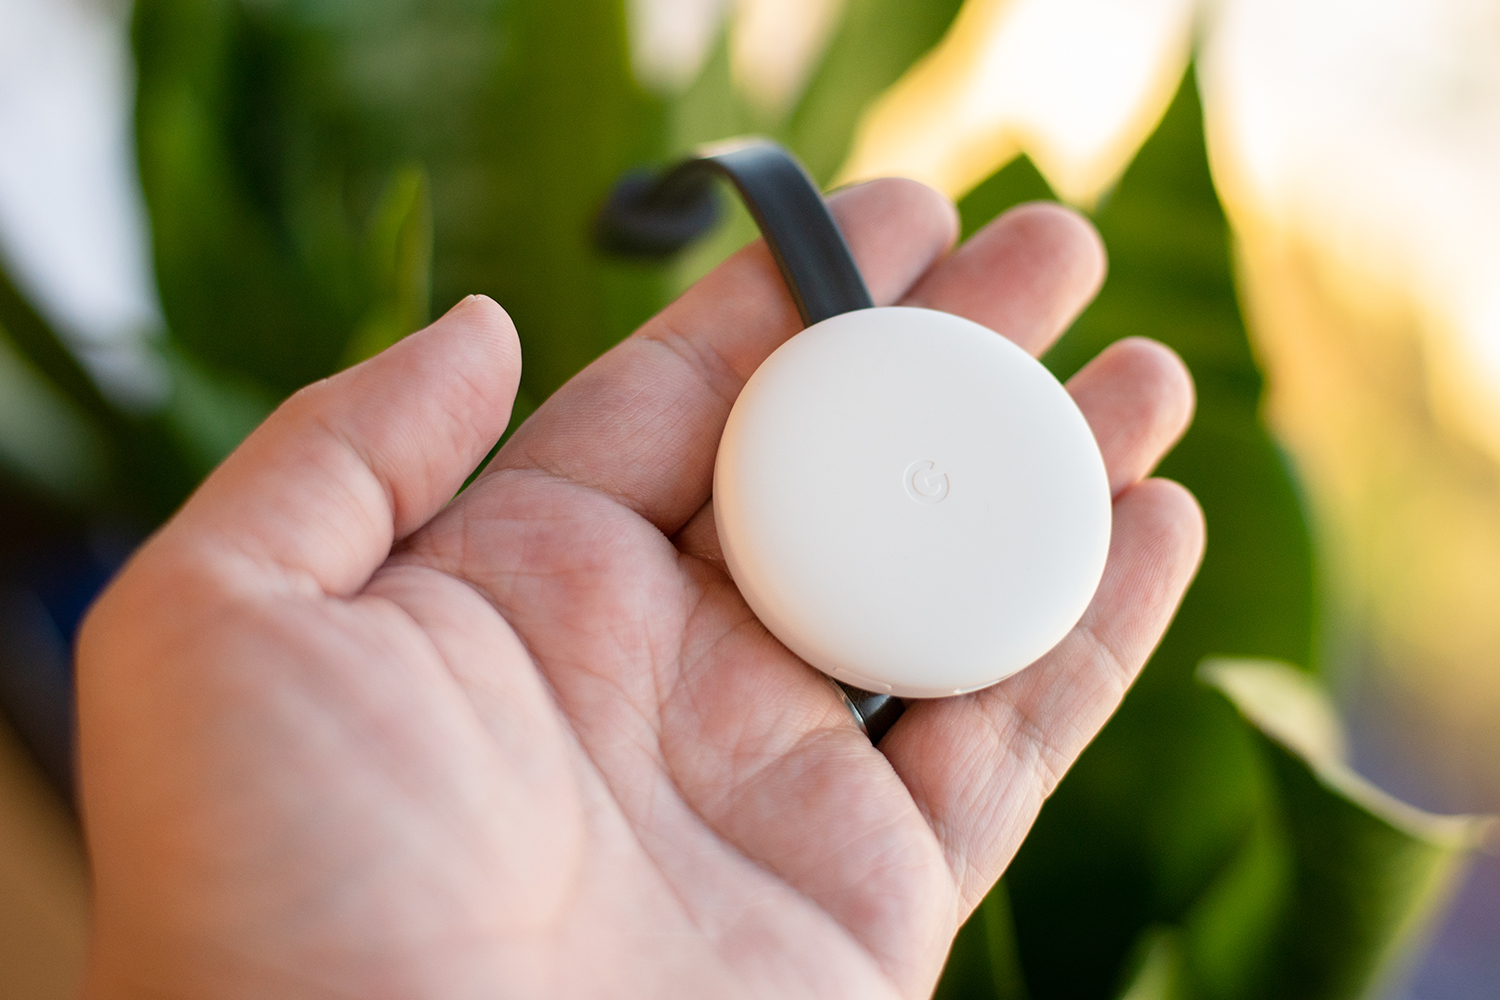 9 years later, Chromecast has way more — at a lower price